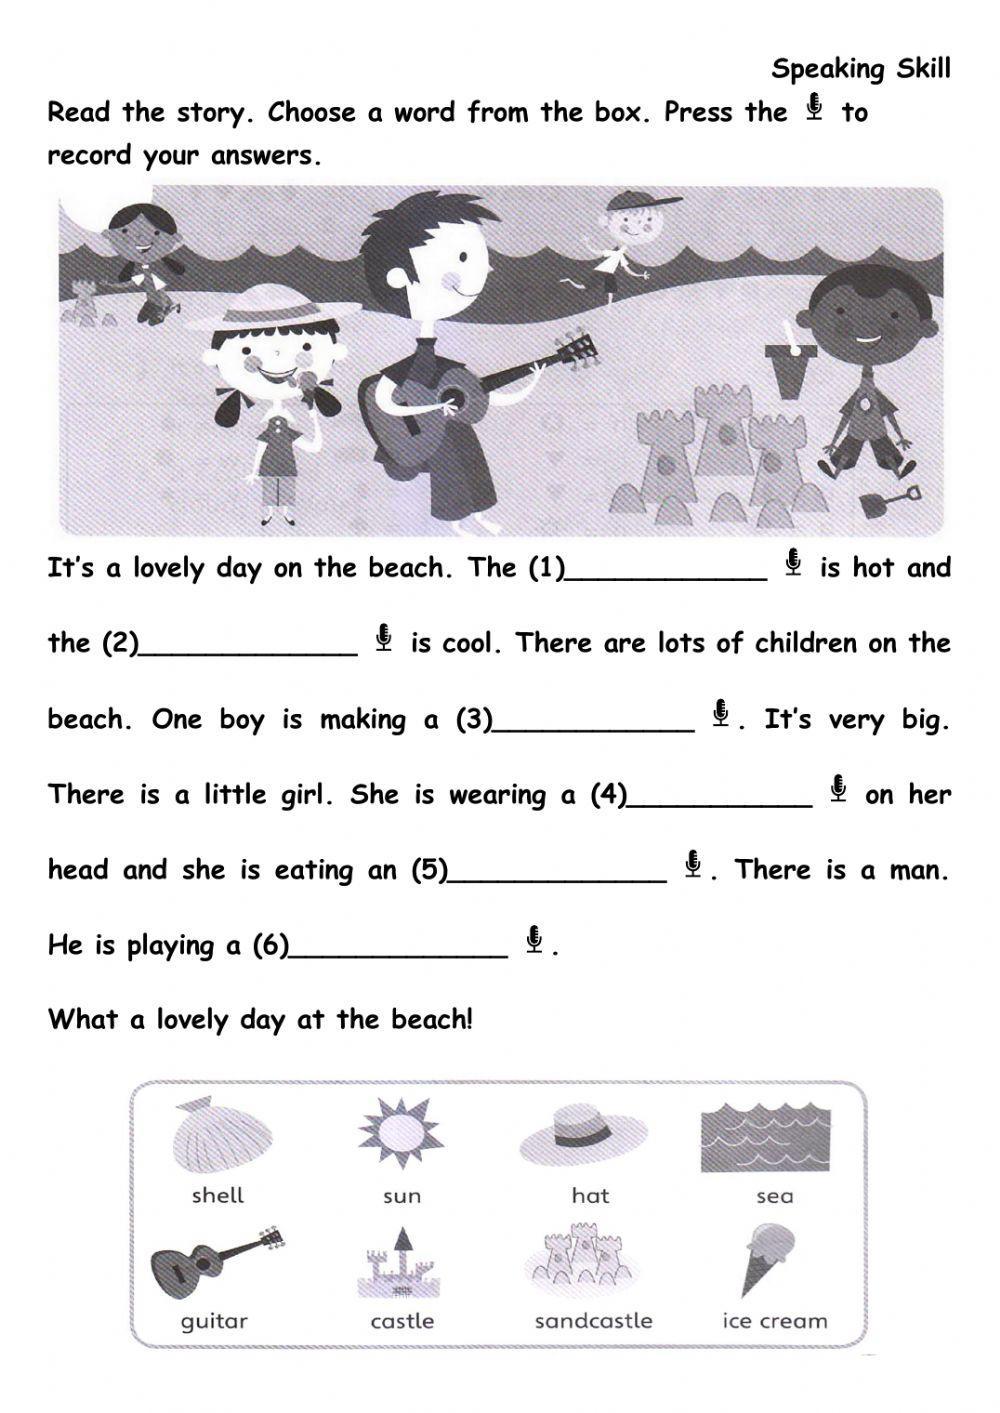 WB p113-Read the story. Choose a word from the box. Press the recorders to record your answers.